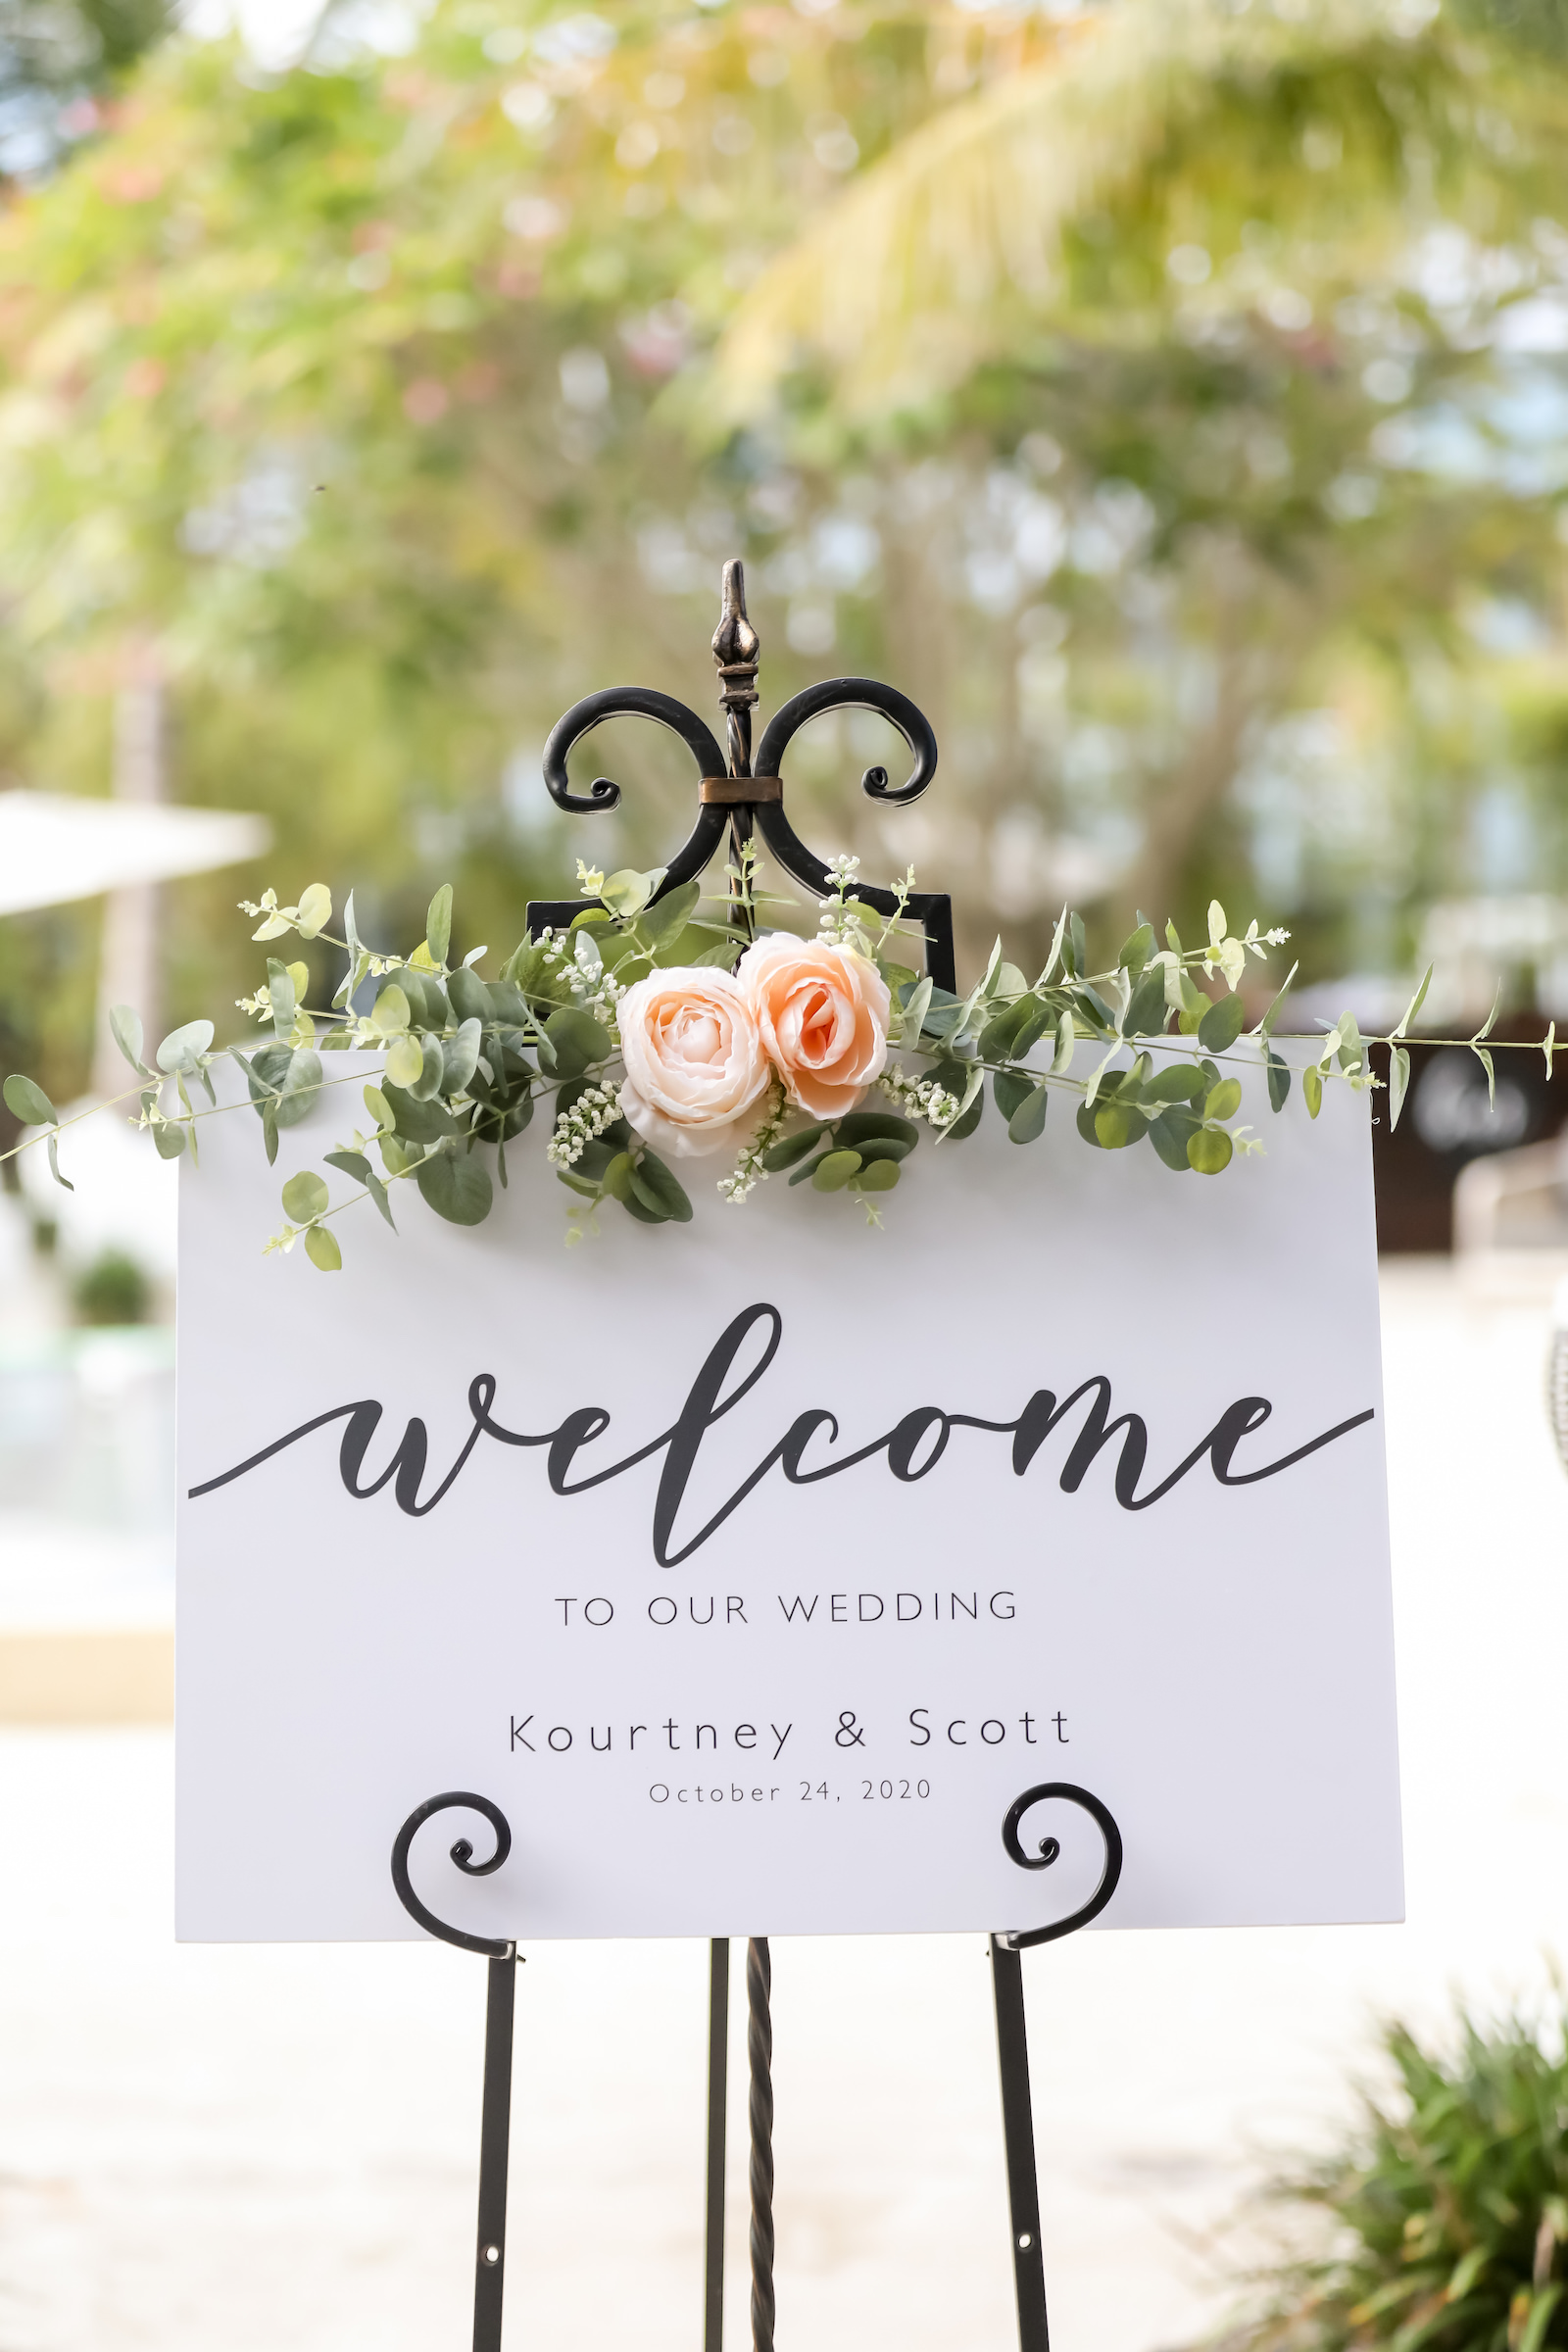 Modern Wedding Ceremony Decor, Black and White Welcome Sign topped with Light Pink Floral Arrangement with Greenery | Florida Wedding Photographer Lifelong Photography Studio | Anna Marie Island Wedding Planner and Coordinator Kelly Kennedy Weddings